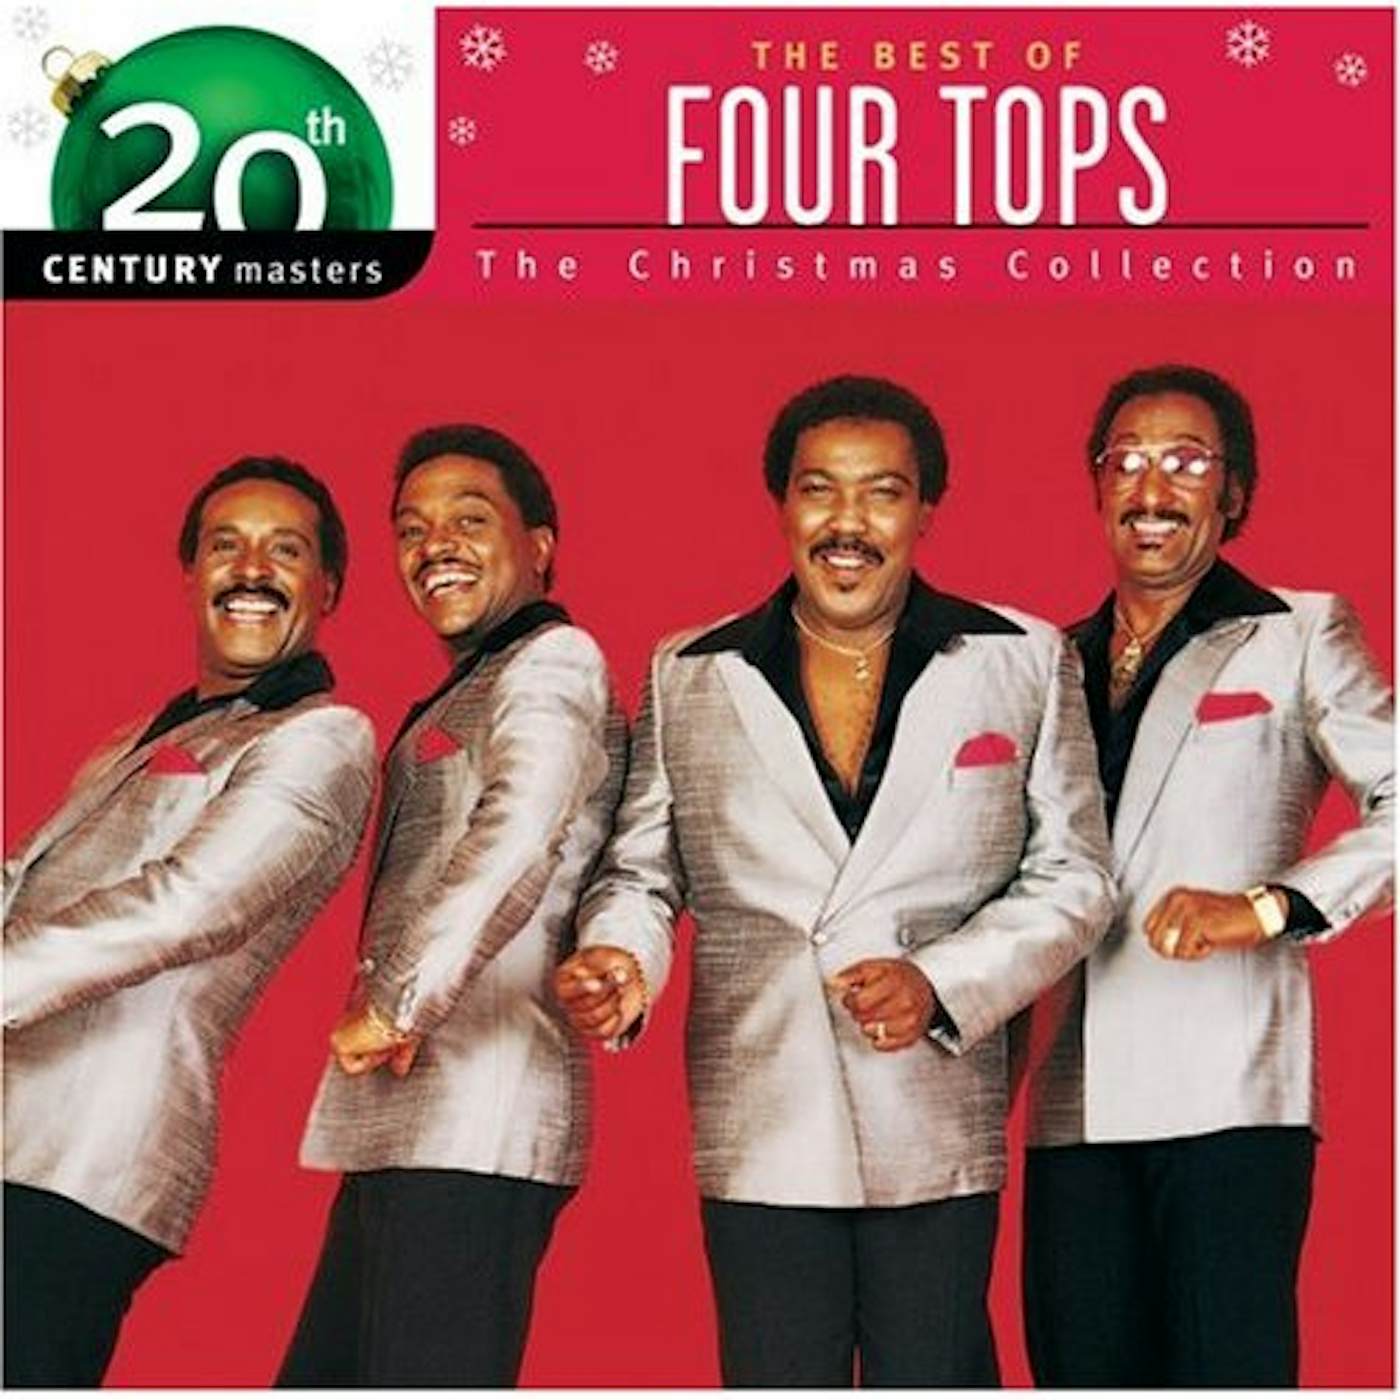 Four Tops CHRISTMAS COLLECTION: 20TH CENTURY MASTERS CD